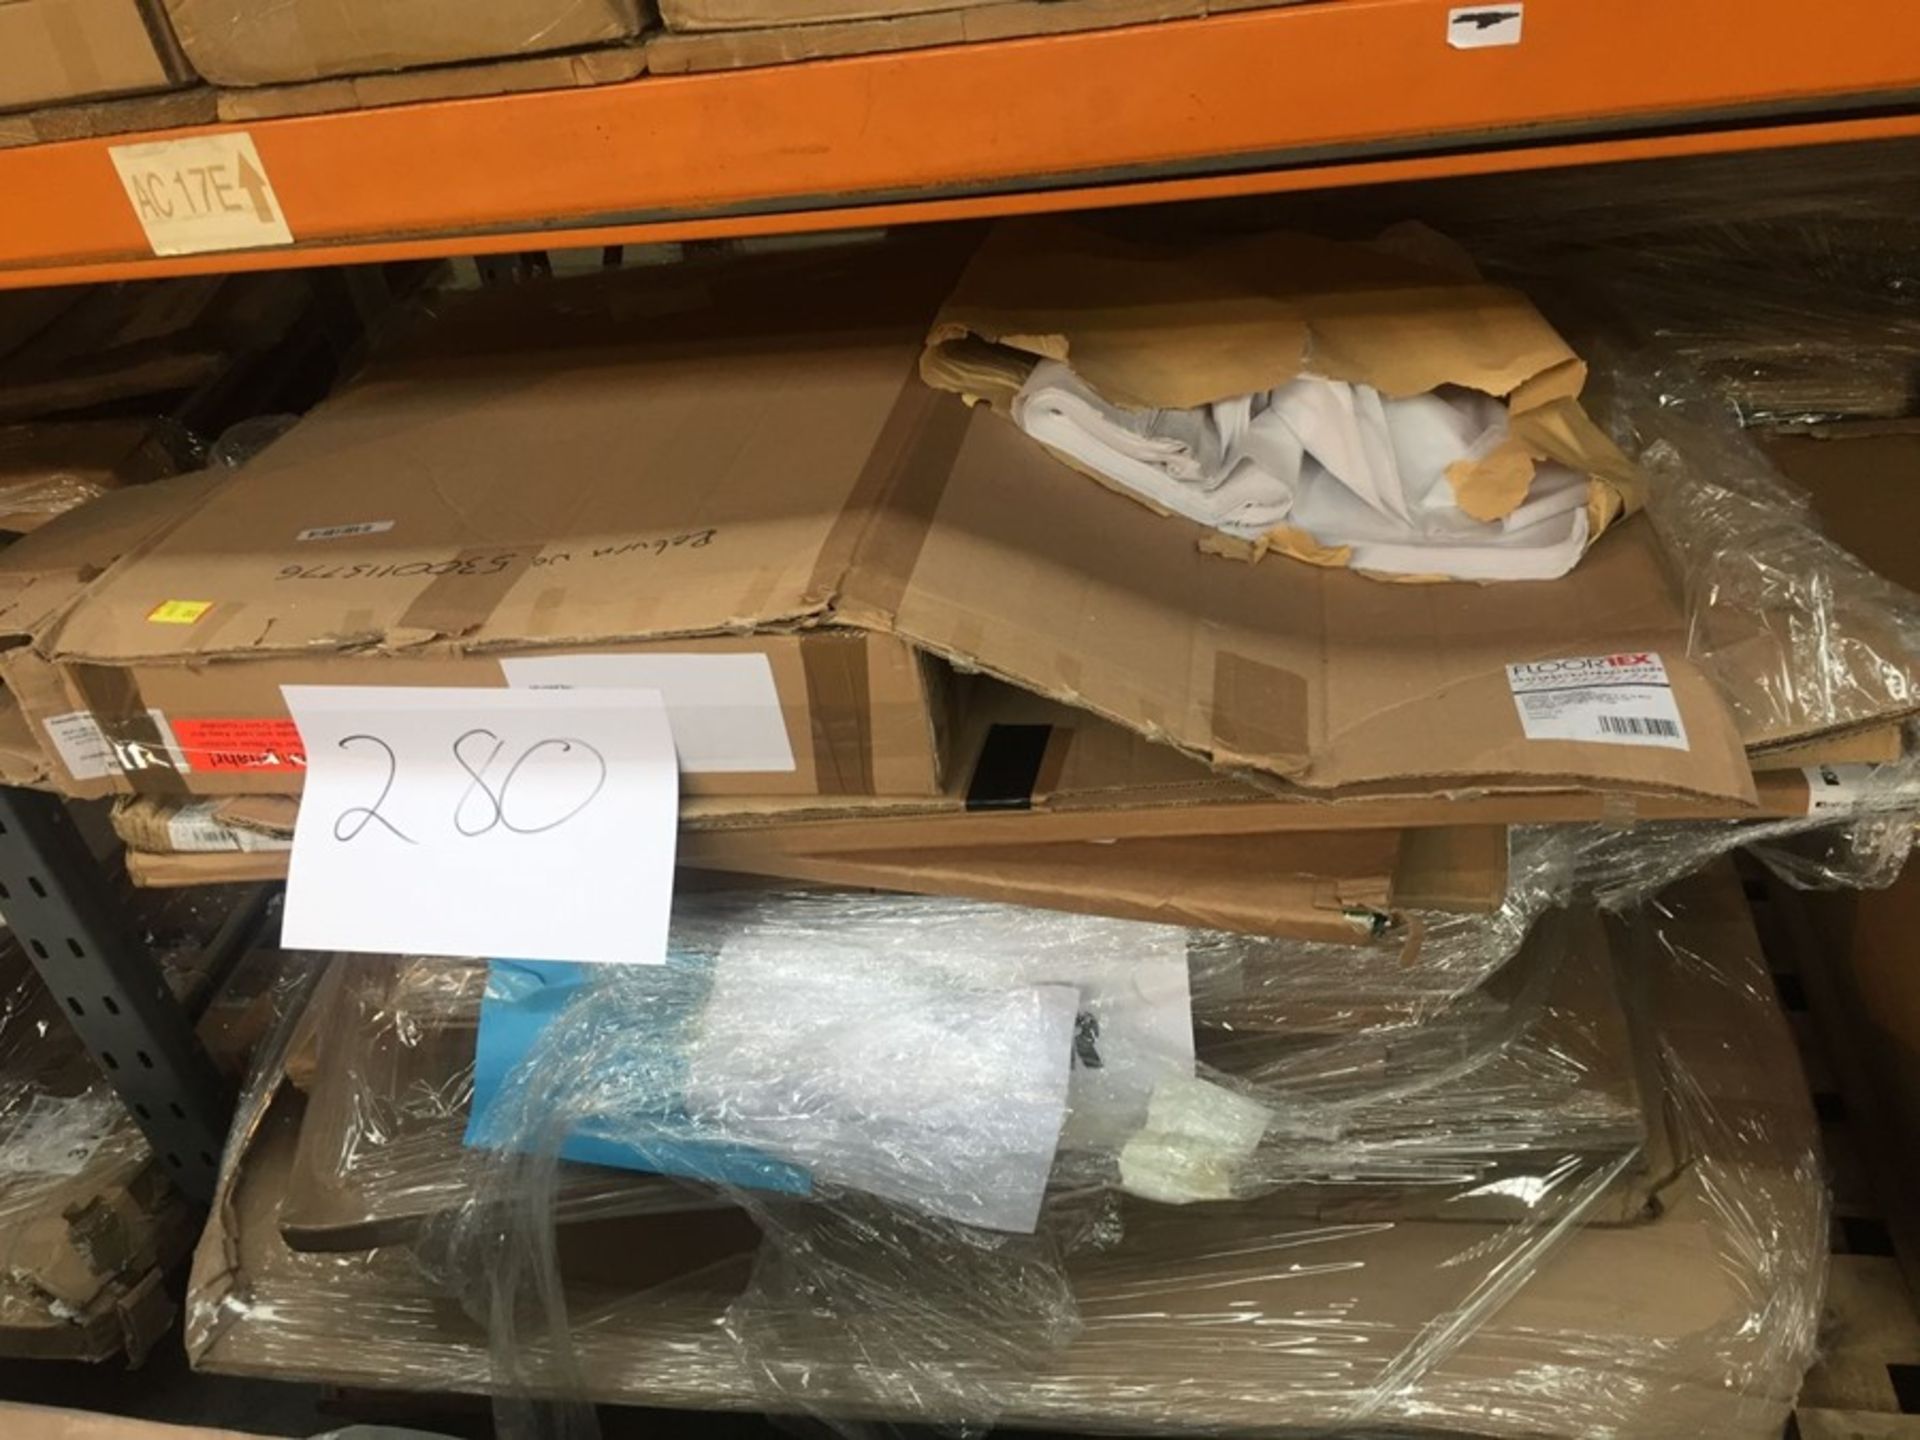 1 LOT TO CONTAIN A BULK PALLET OF ASSORTED WHITEBOARDS, NOTICEBOARDS AND CARDBOARD - L8